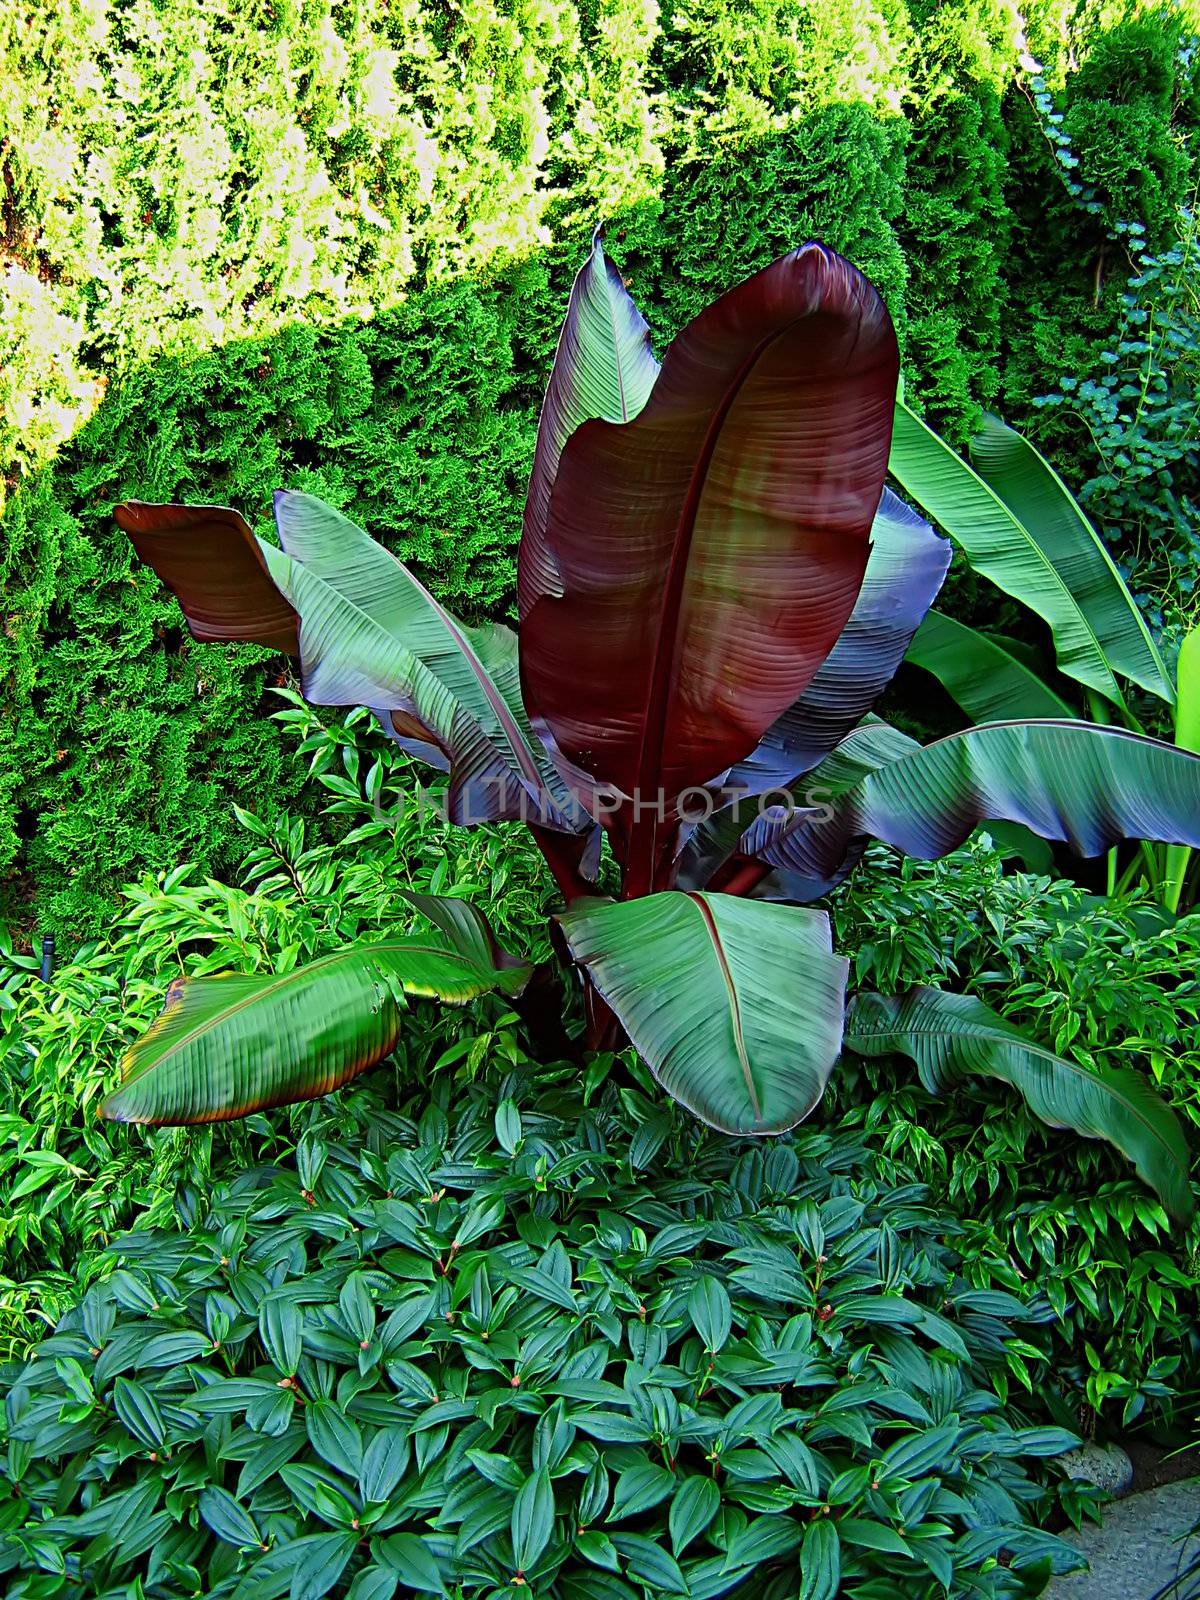 A photograph of various vegetation used in landscaping.  The large broad-leafed plant is a banana.